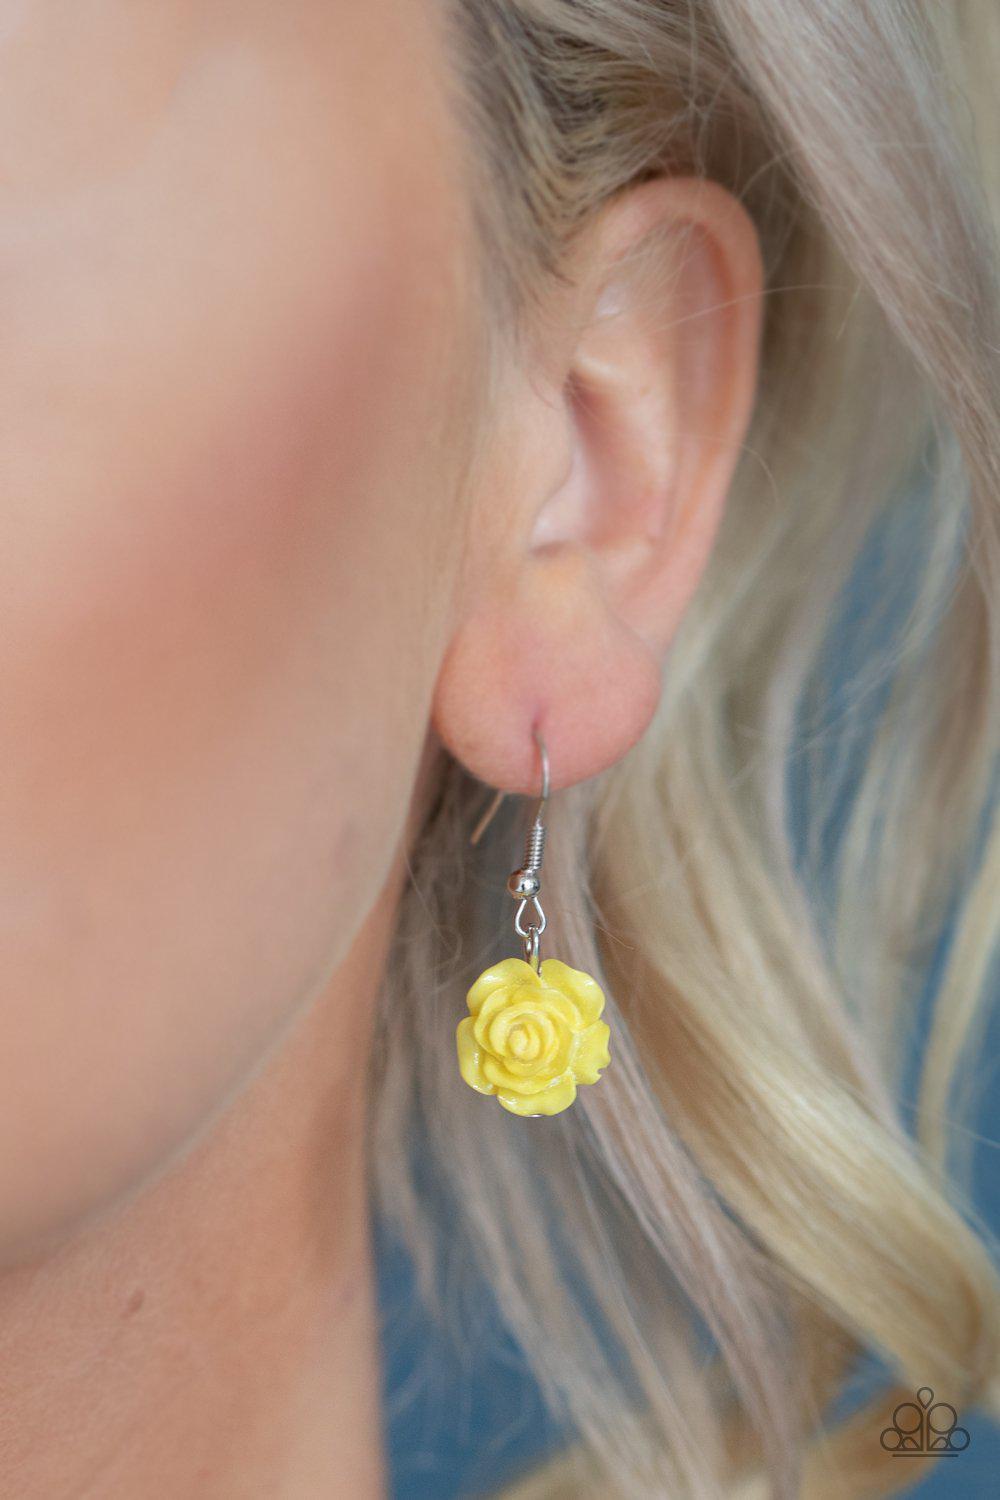 Garden Party Posh Yellow Rose Flower Necklace - Paparazzi Accessories-free matching earrings -CarasShop.com - $5 Jewelry by Cara Jewels